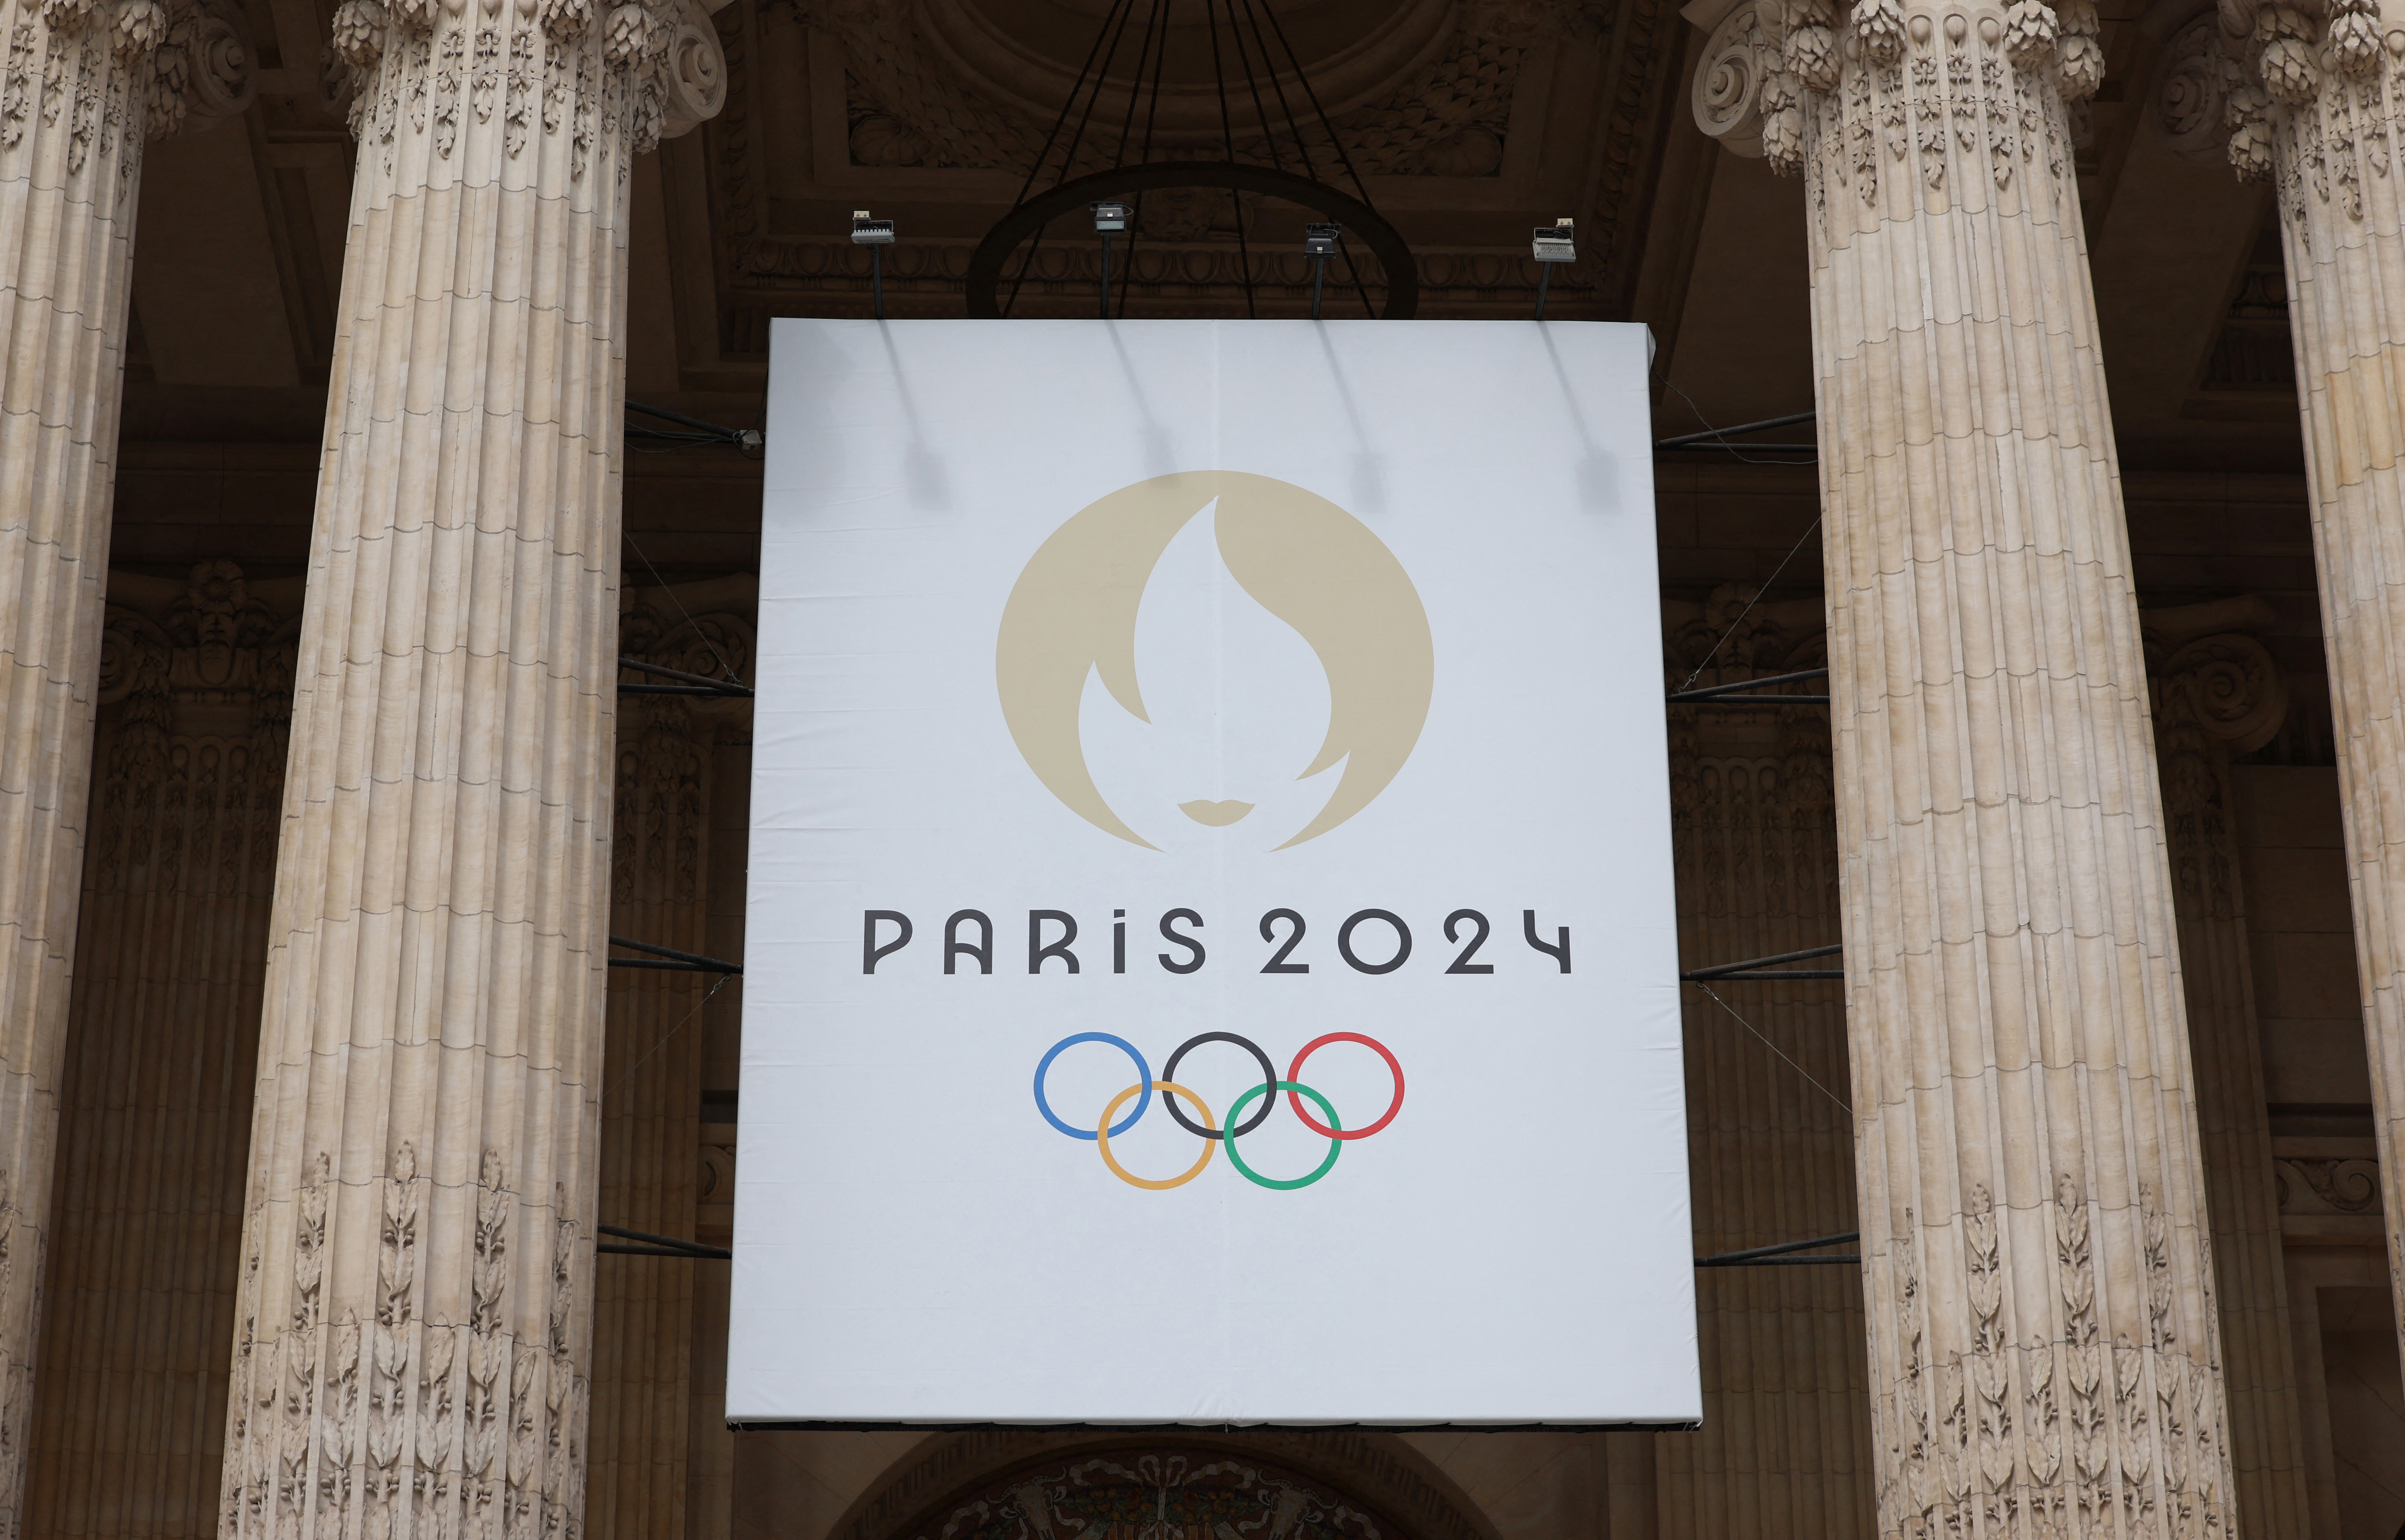 The opening ceremony for the 2024 Olympics in Paris will take place on Friday